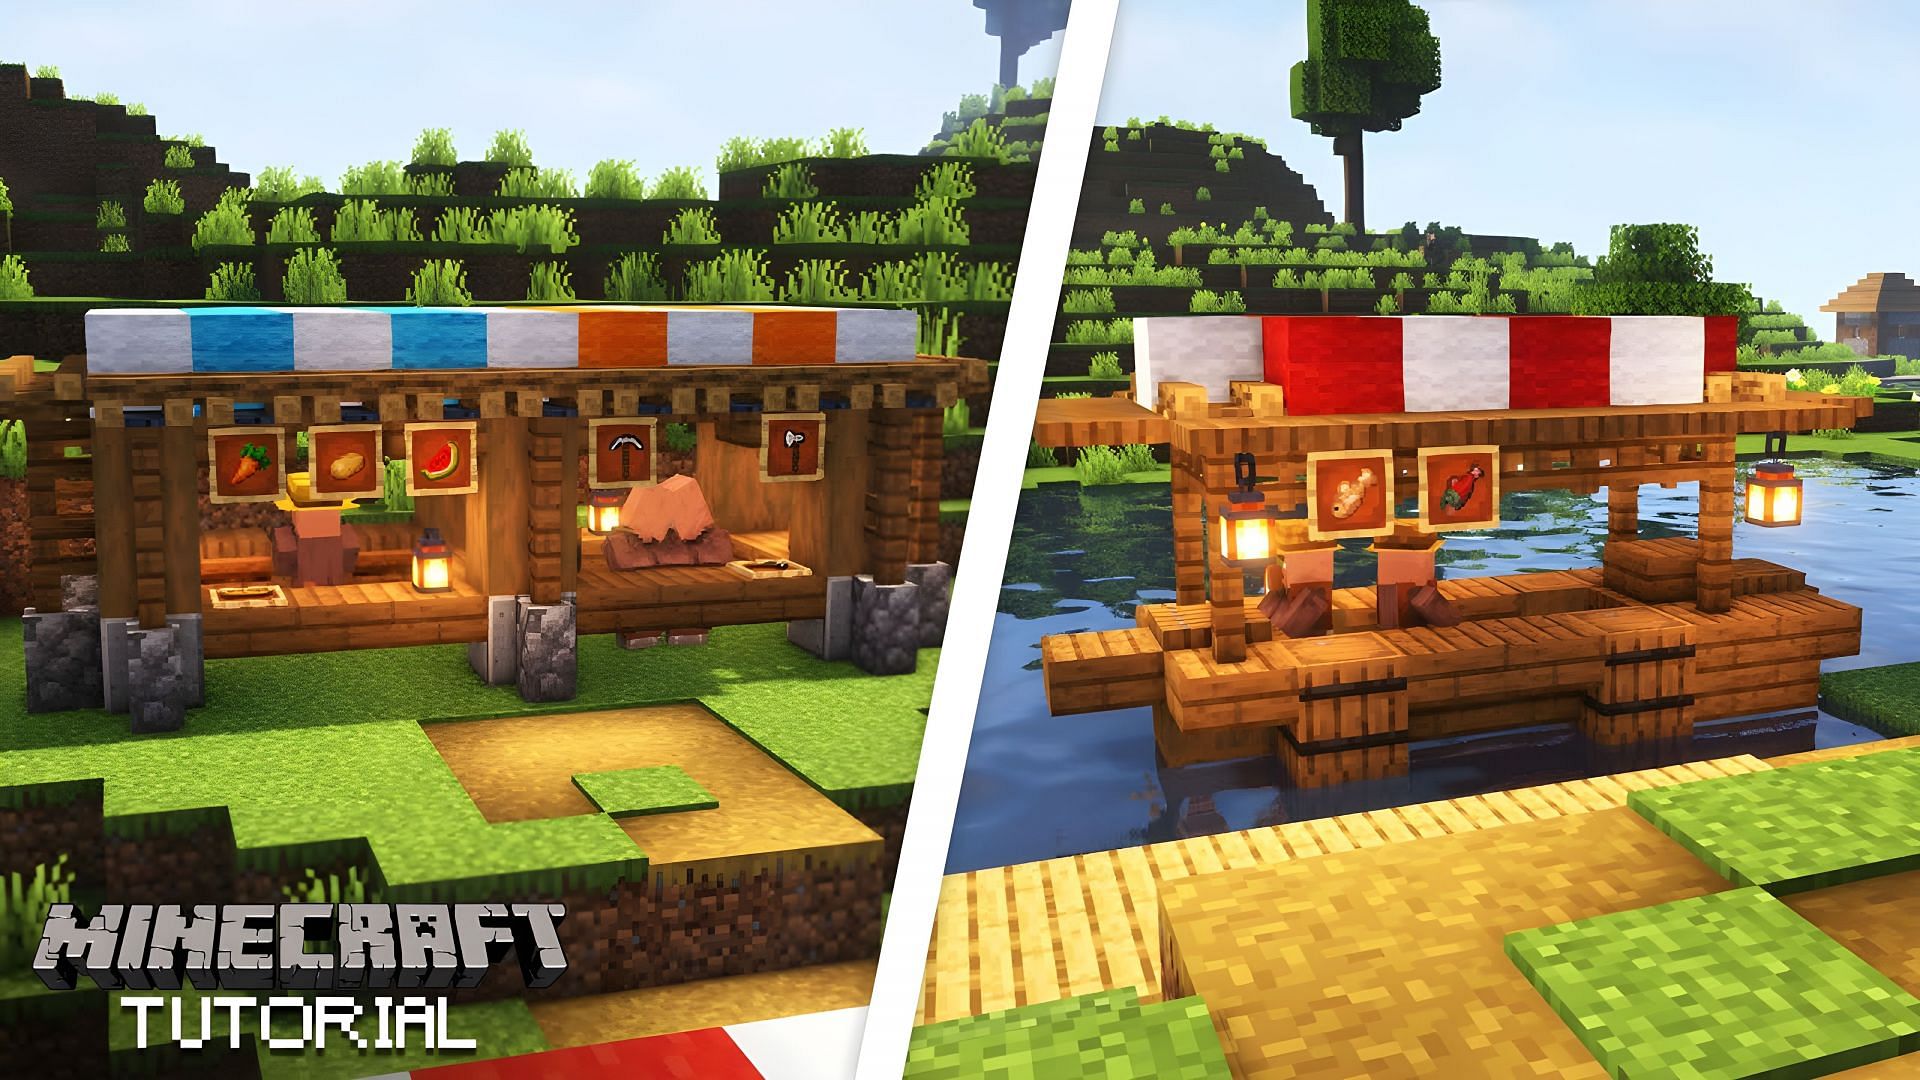 Markets are an amazing Minecraft build (Image via Youtube/Melthie)